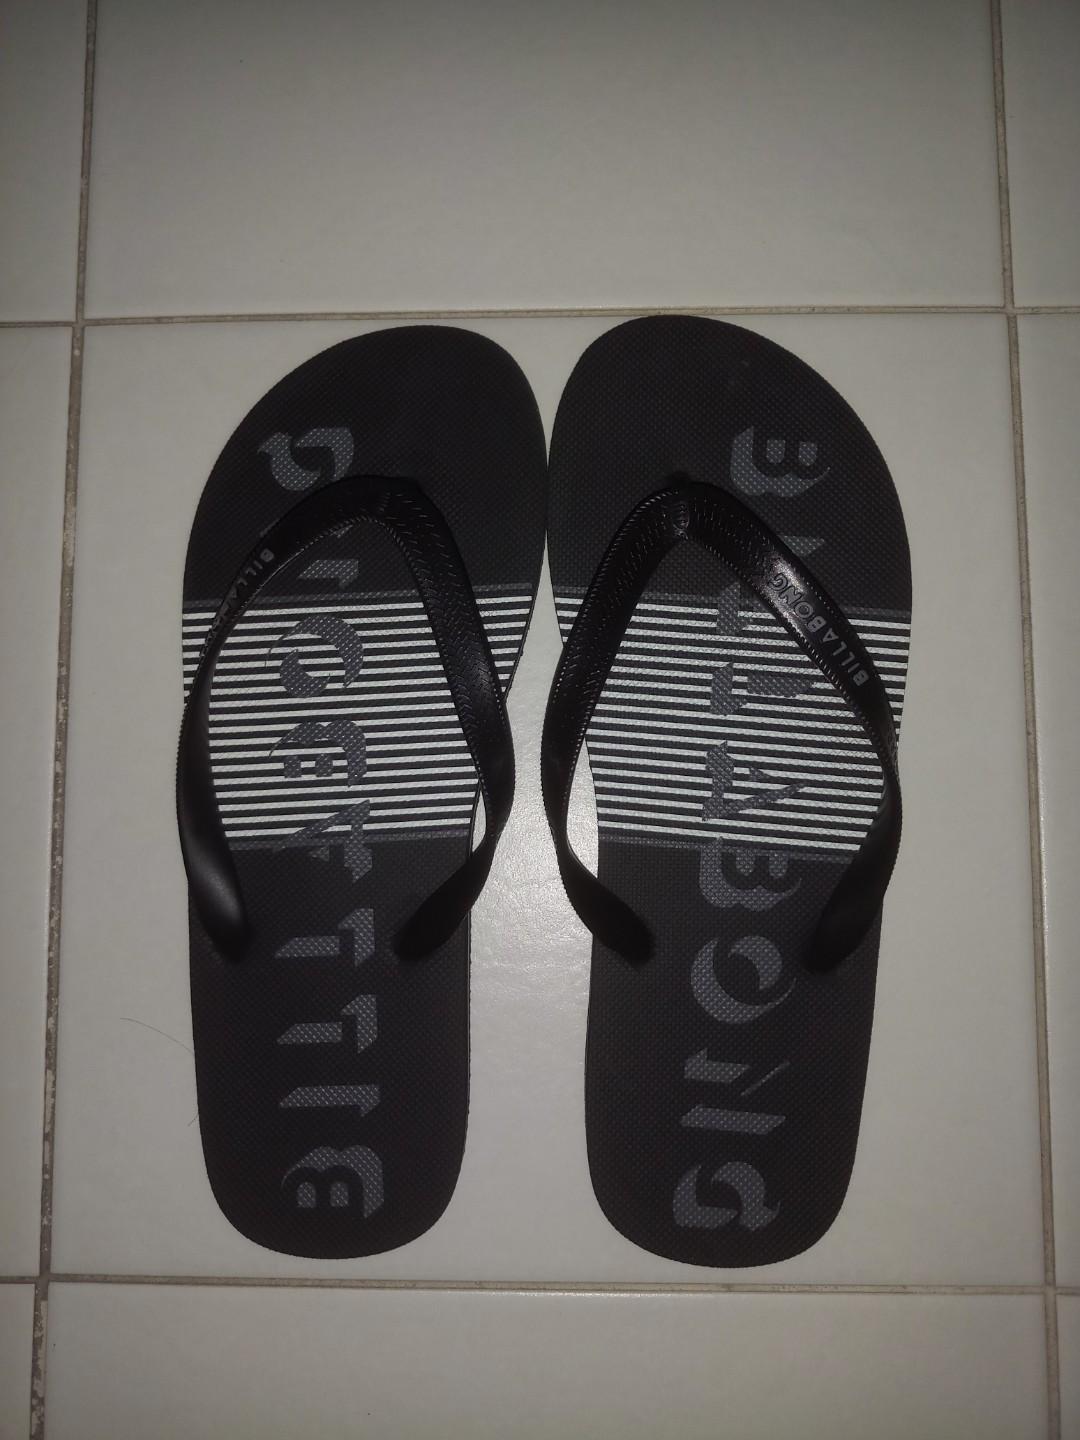 Slippers (USED ONCE ONLY), Men's 